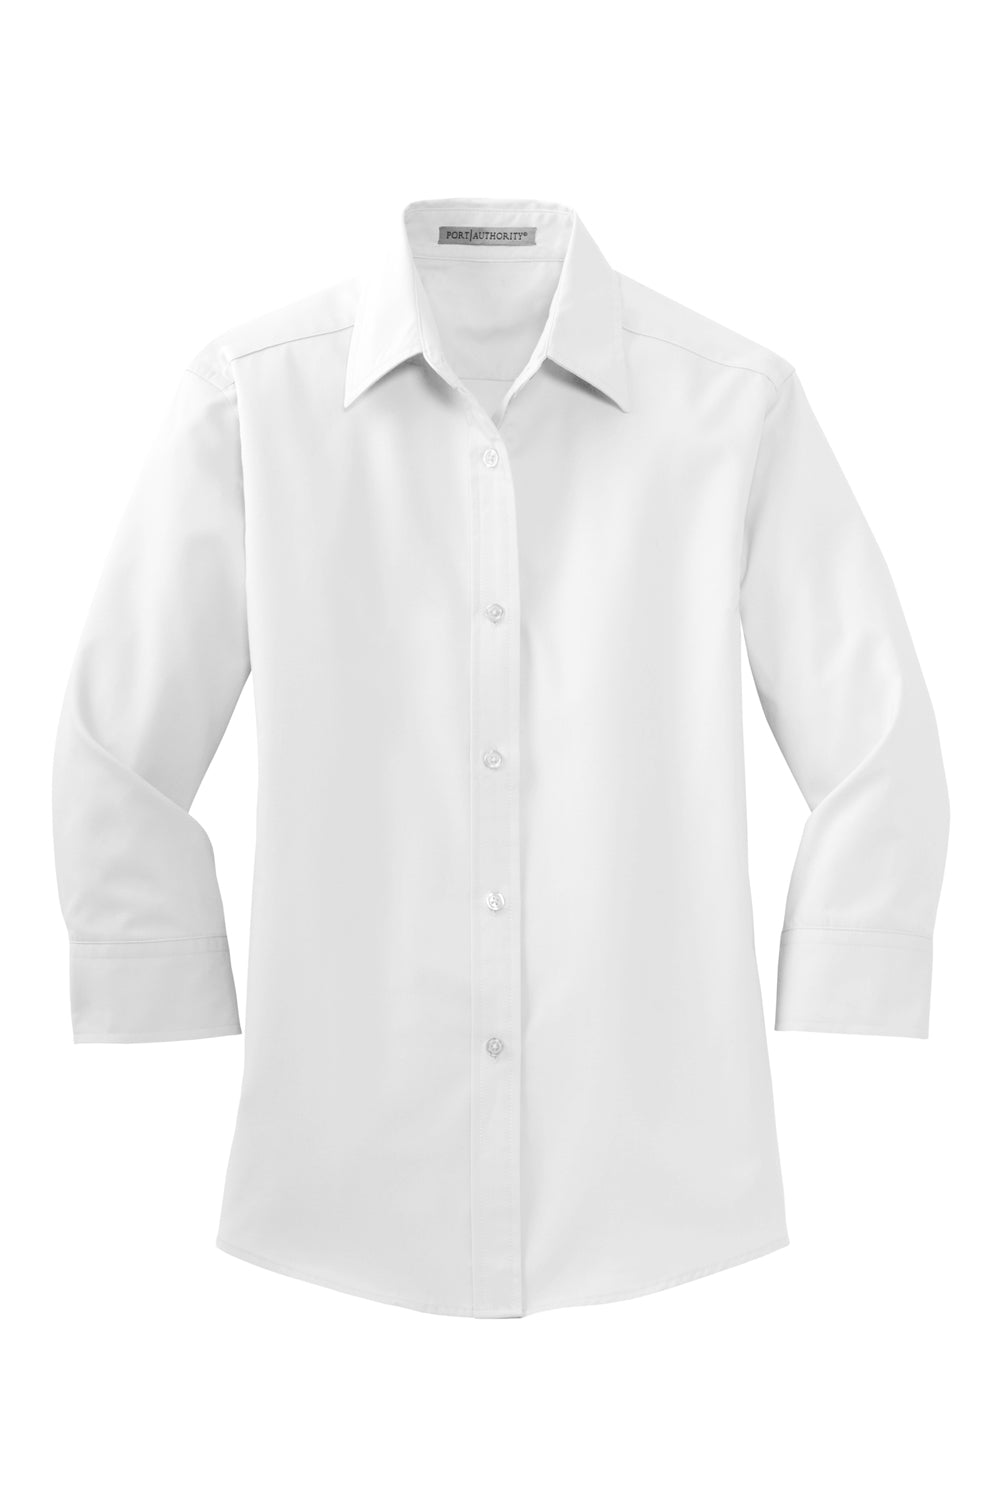 Port Authority L612 Womens Easy Care Wrinkle Resistant 3/4 Sleeve Button Down Shirt White Flat Front